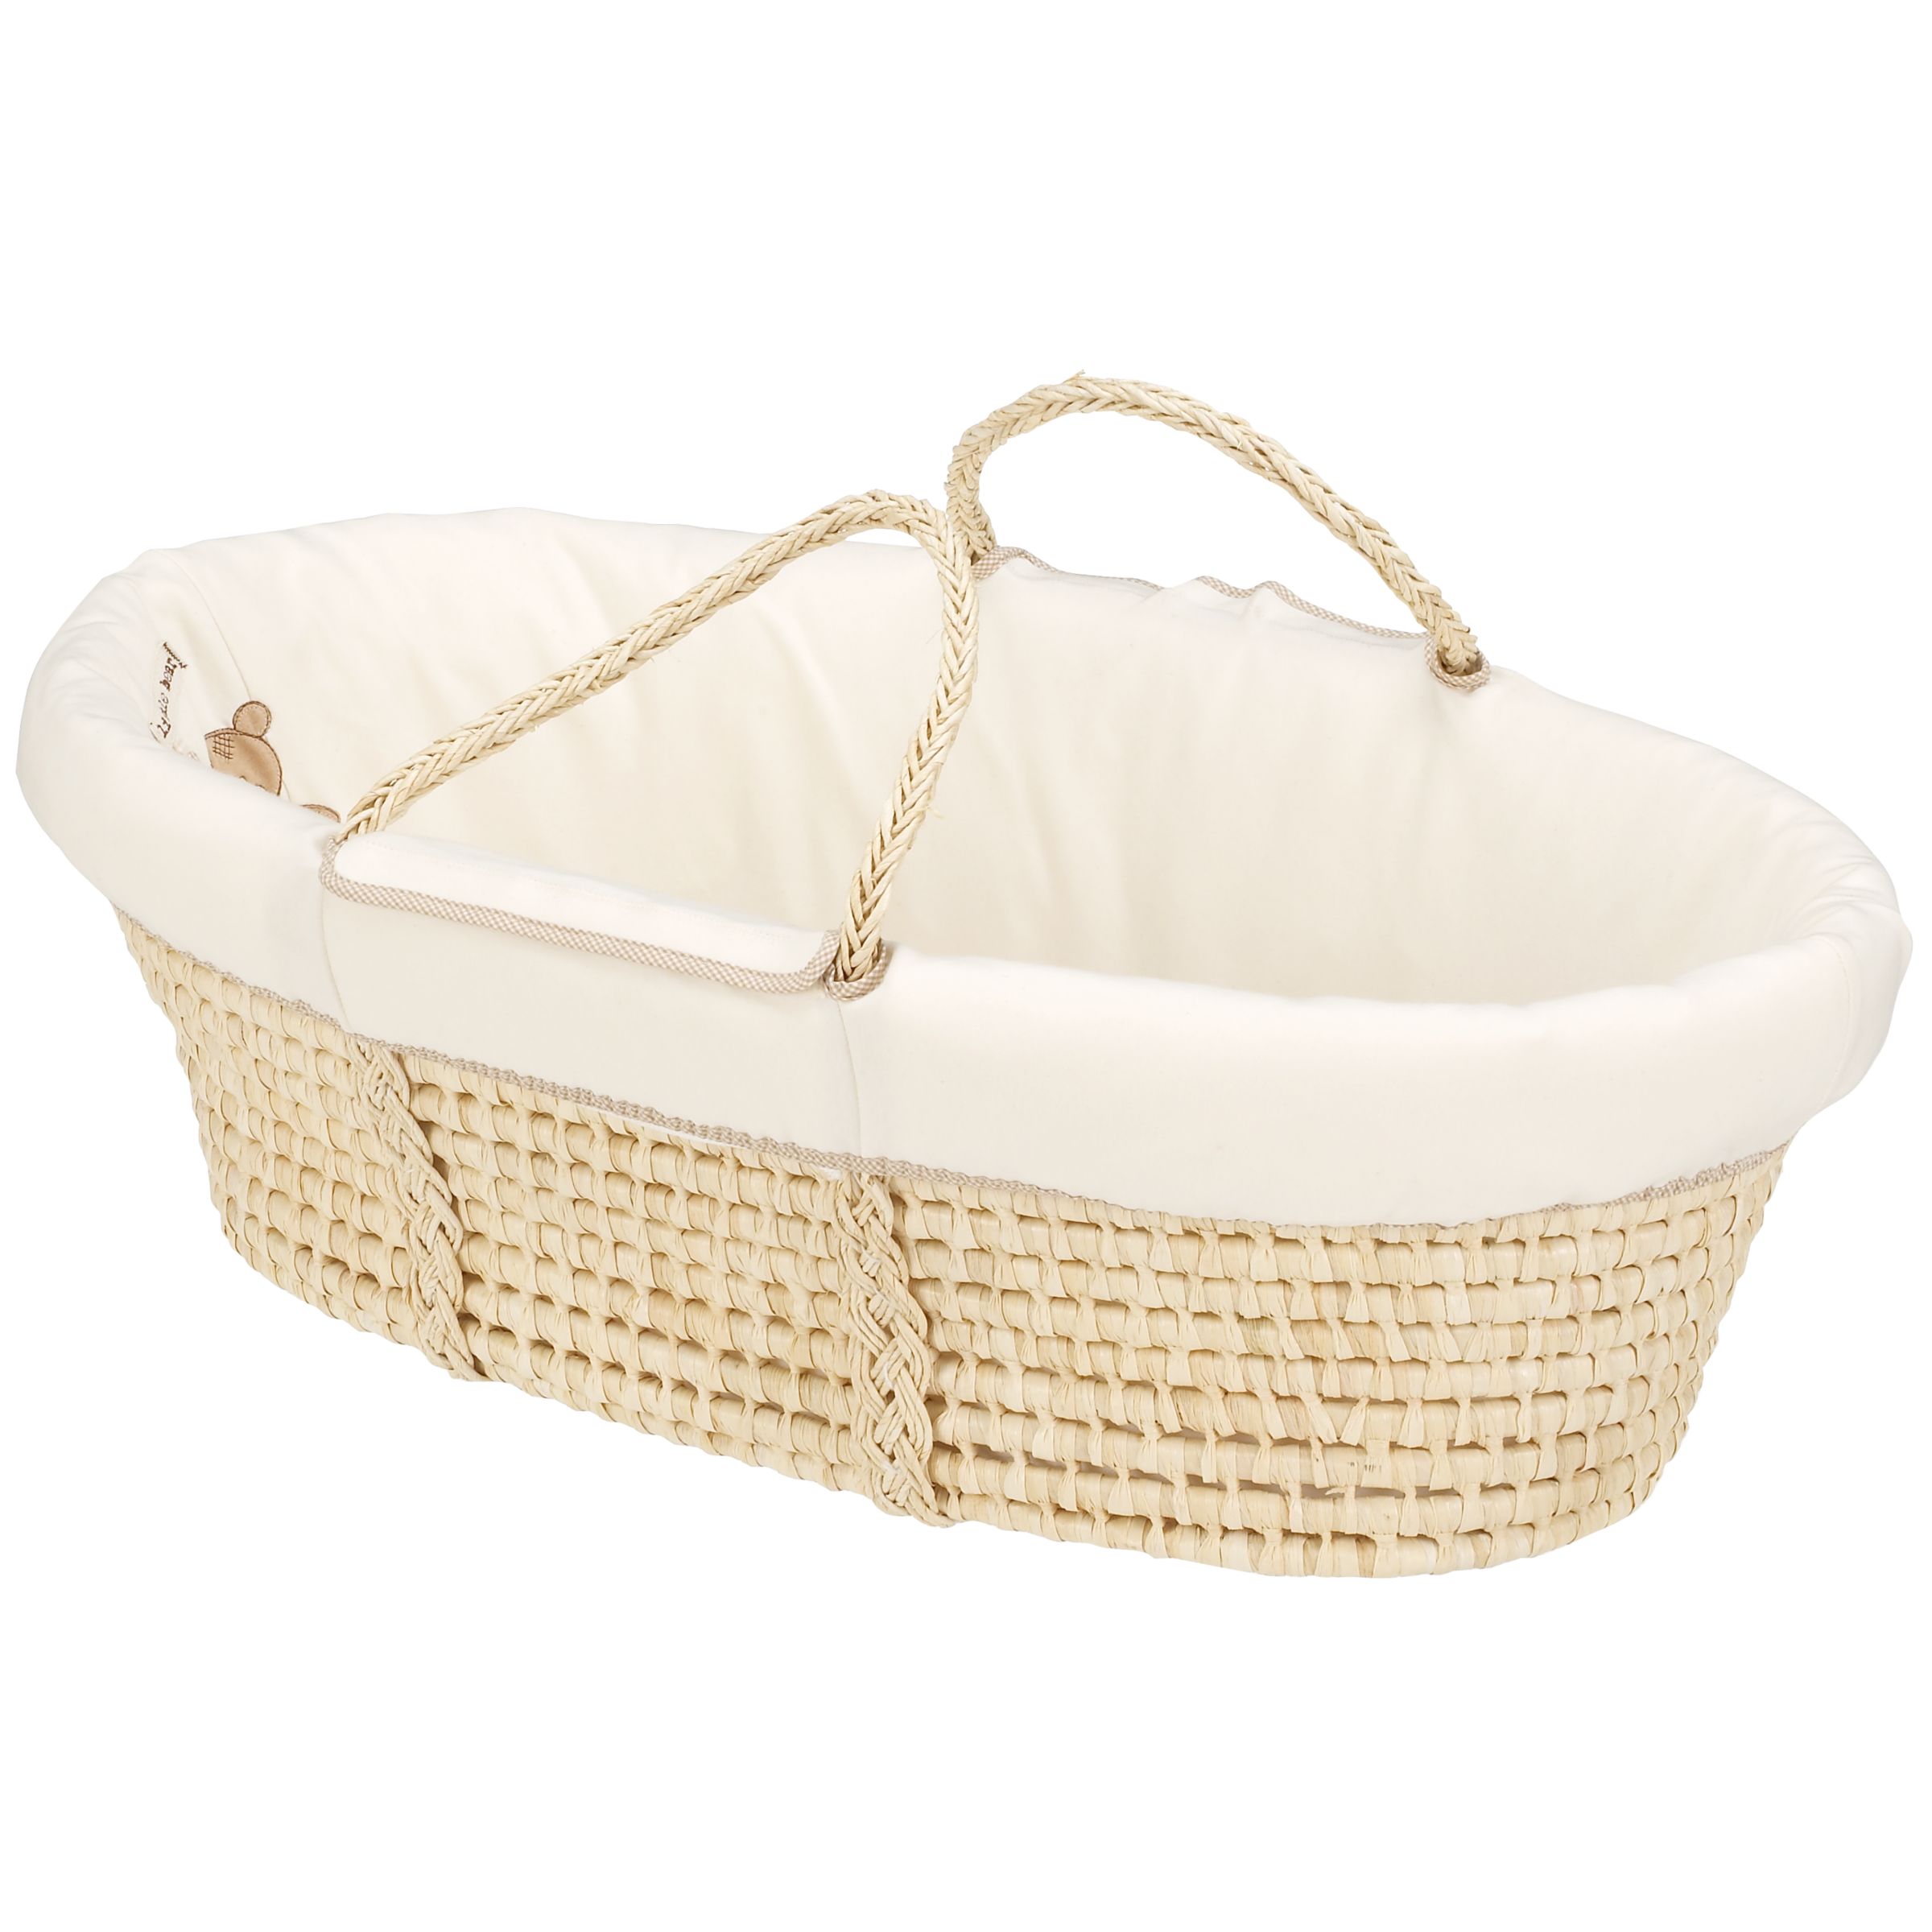 Teddies Moses Basket made with